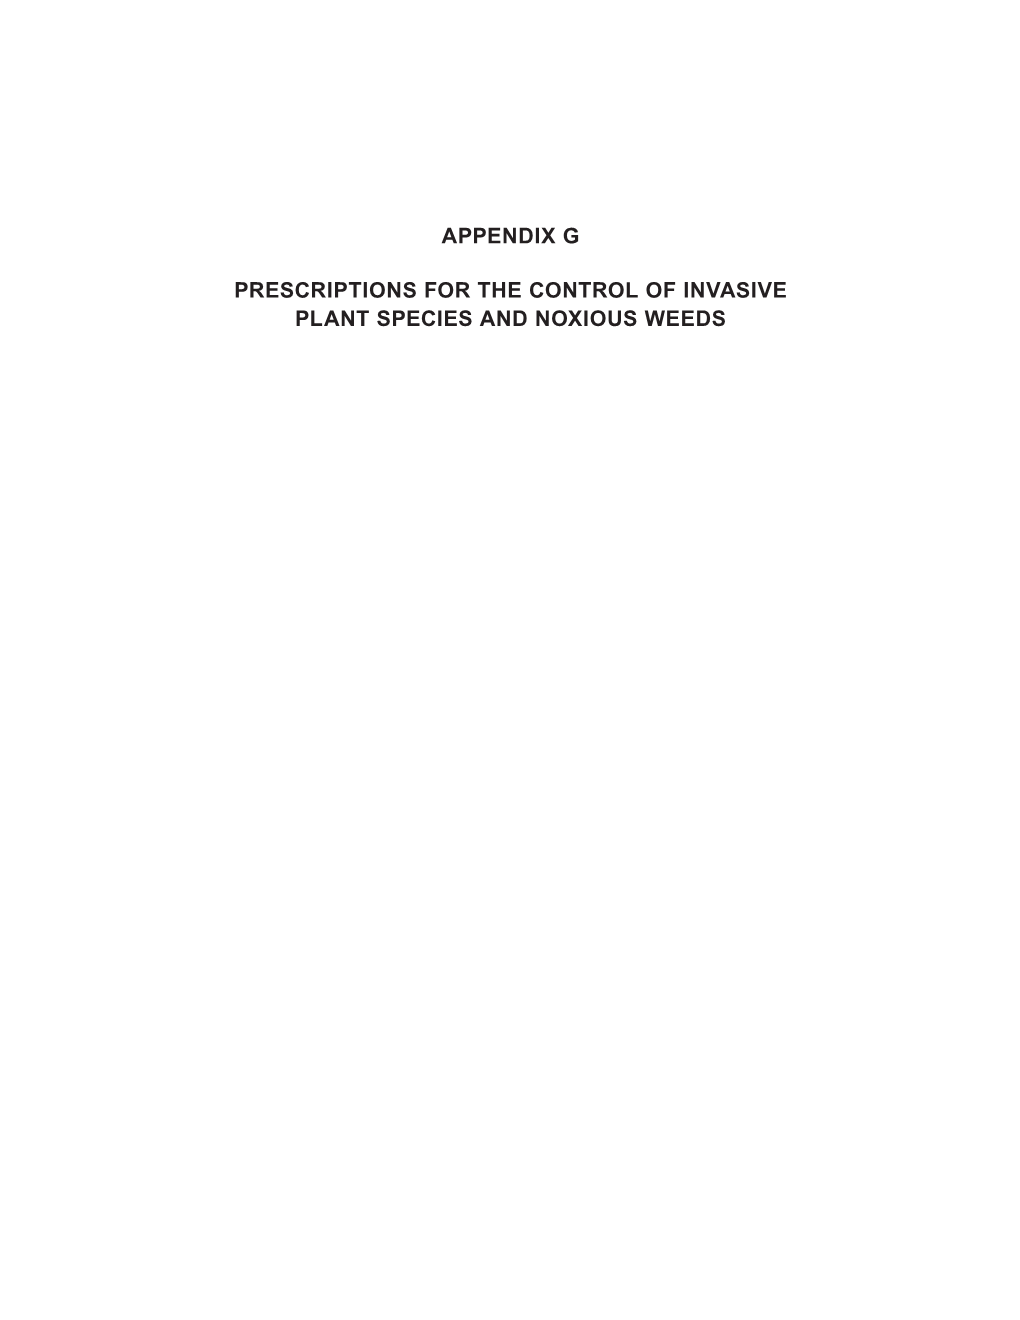 Appendix G Prescriptions for the Control of Invasive Plant Species and Noxious Weeds